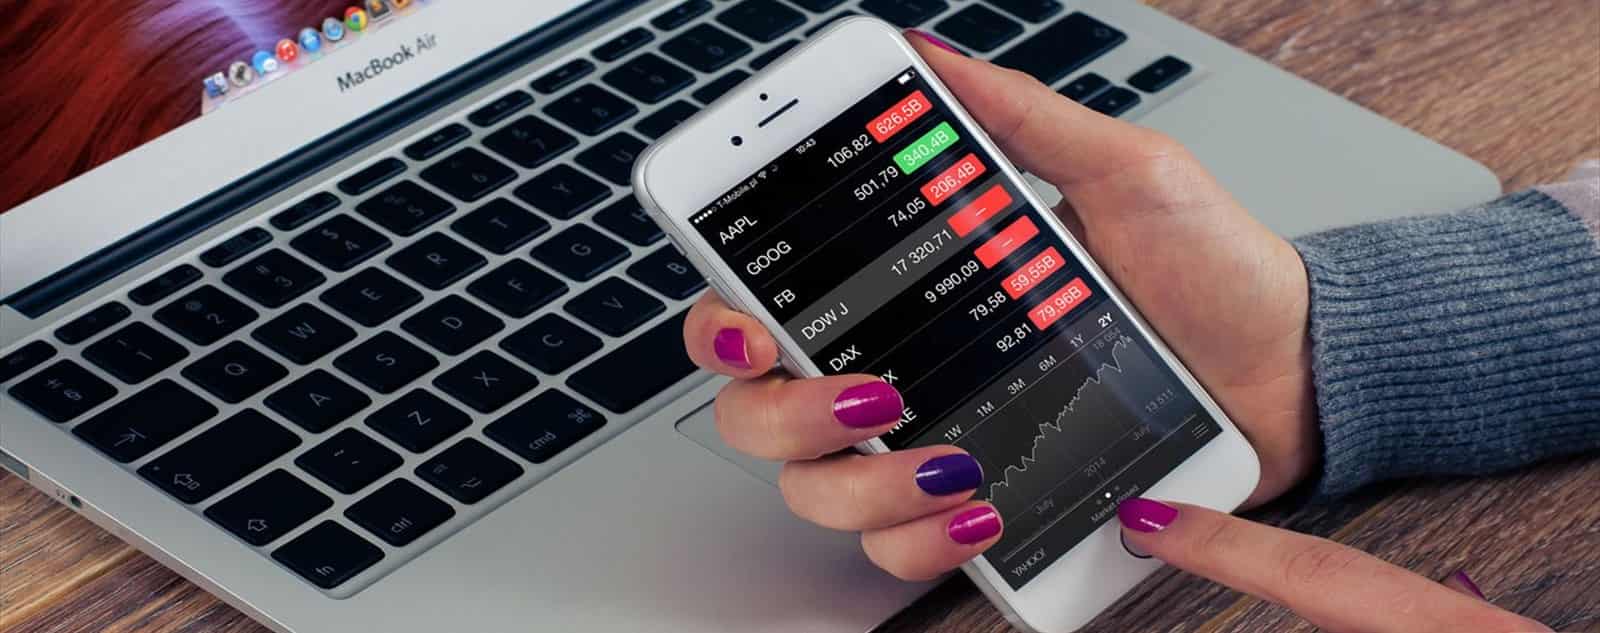 trading online using a smartphone